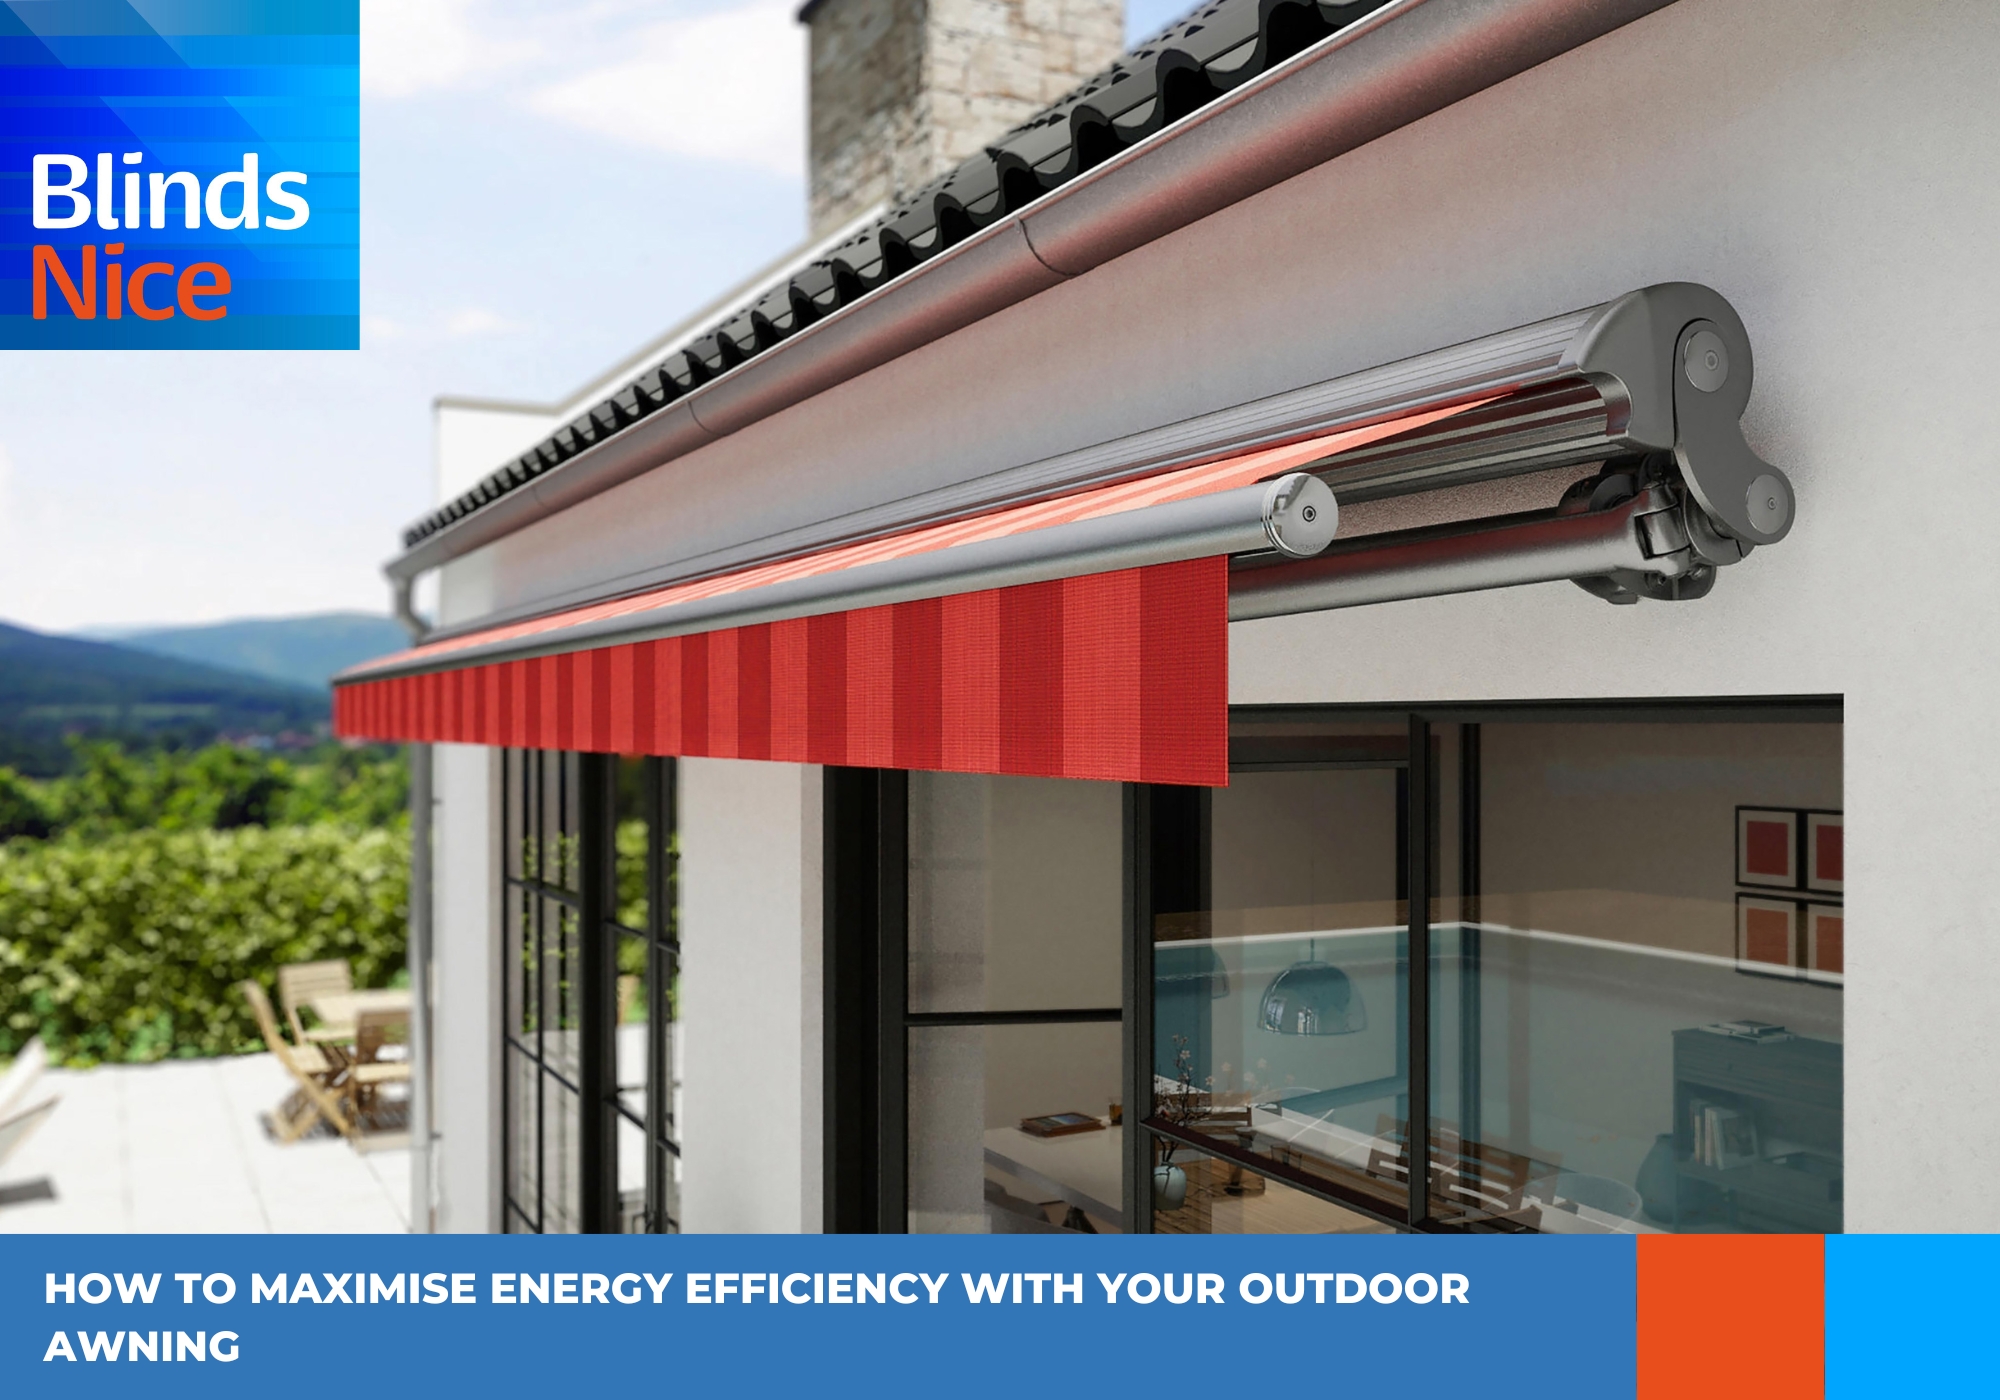 How to maximise energy efficiency with your outdoor awning